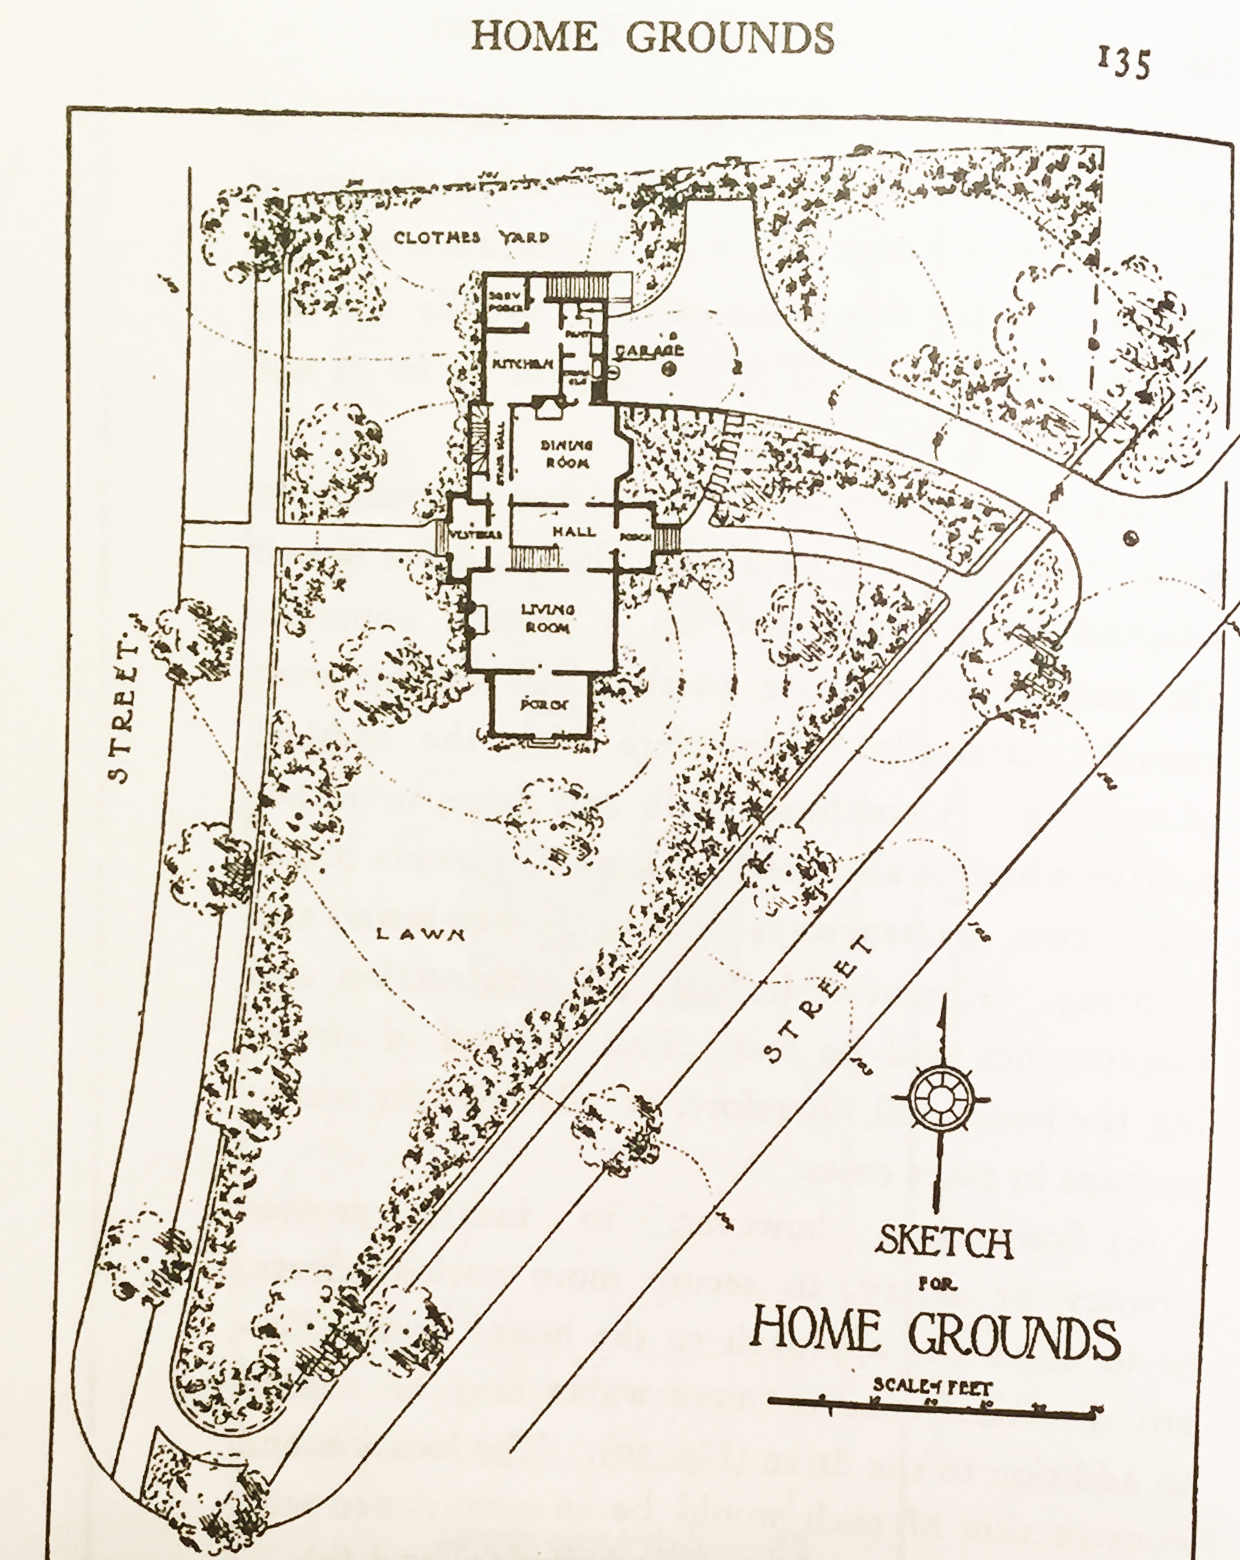 A drawing called "Home Grounds" from Simonds (1920, page 123), illustrating the relationship between structure, a residential landscape, and an adjoining golf course (copyright expired, public domain).